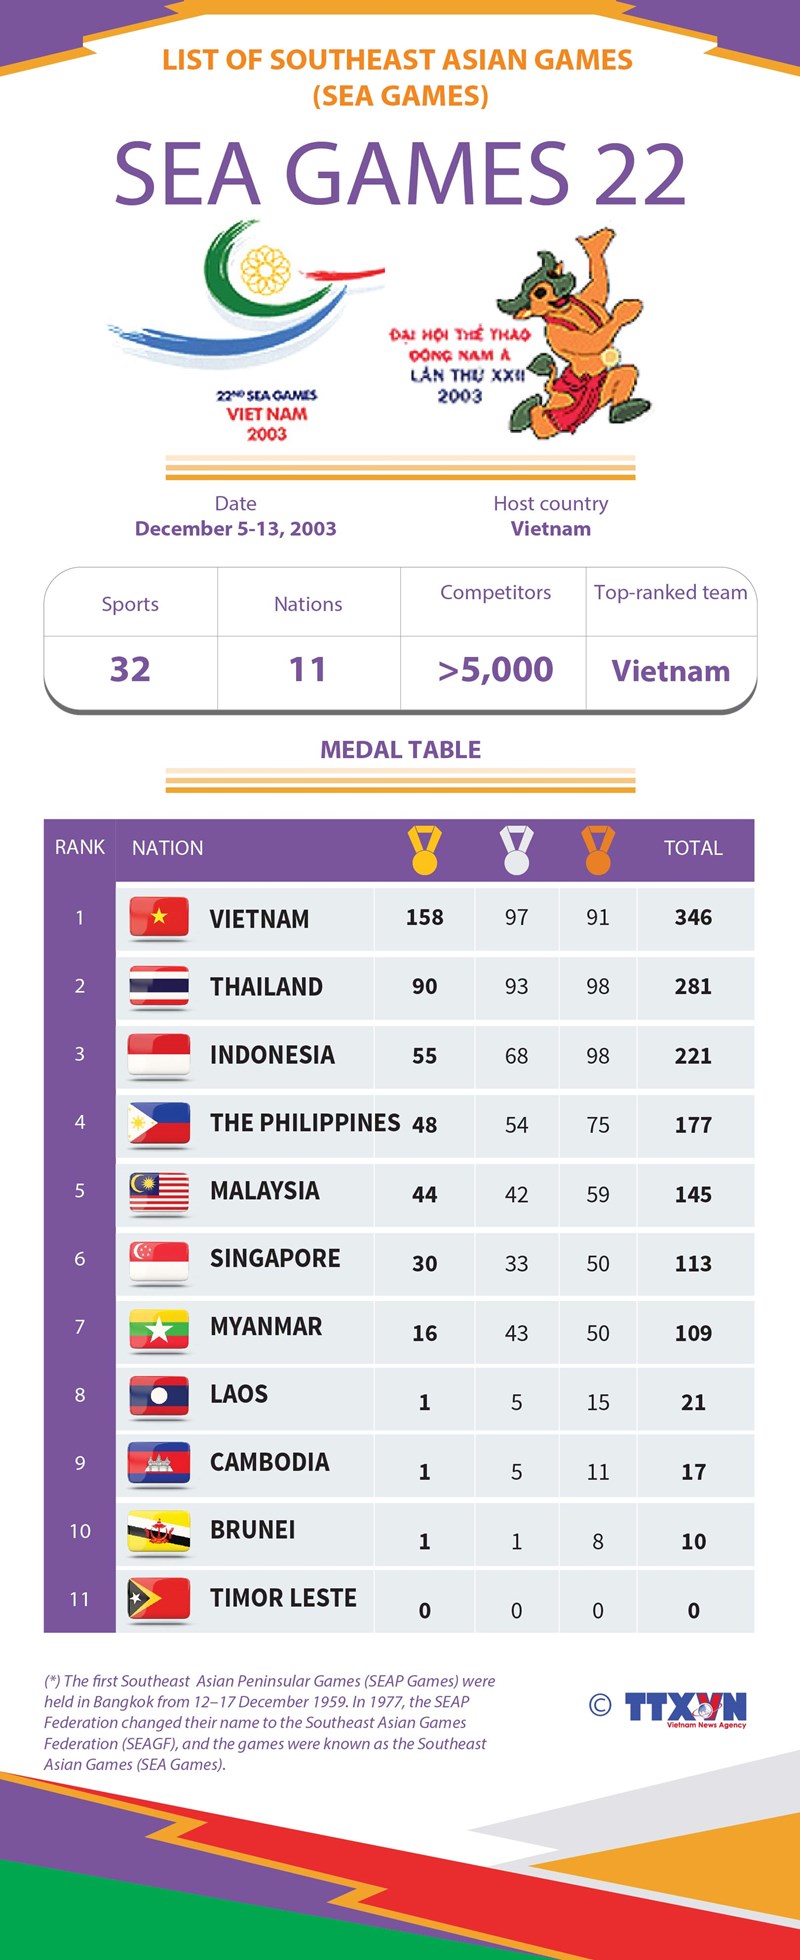 List of Southeast Asian Games: SEA Games 22 hinh anh 1